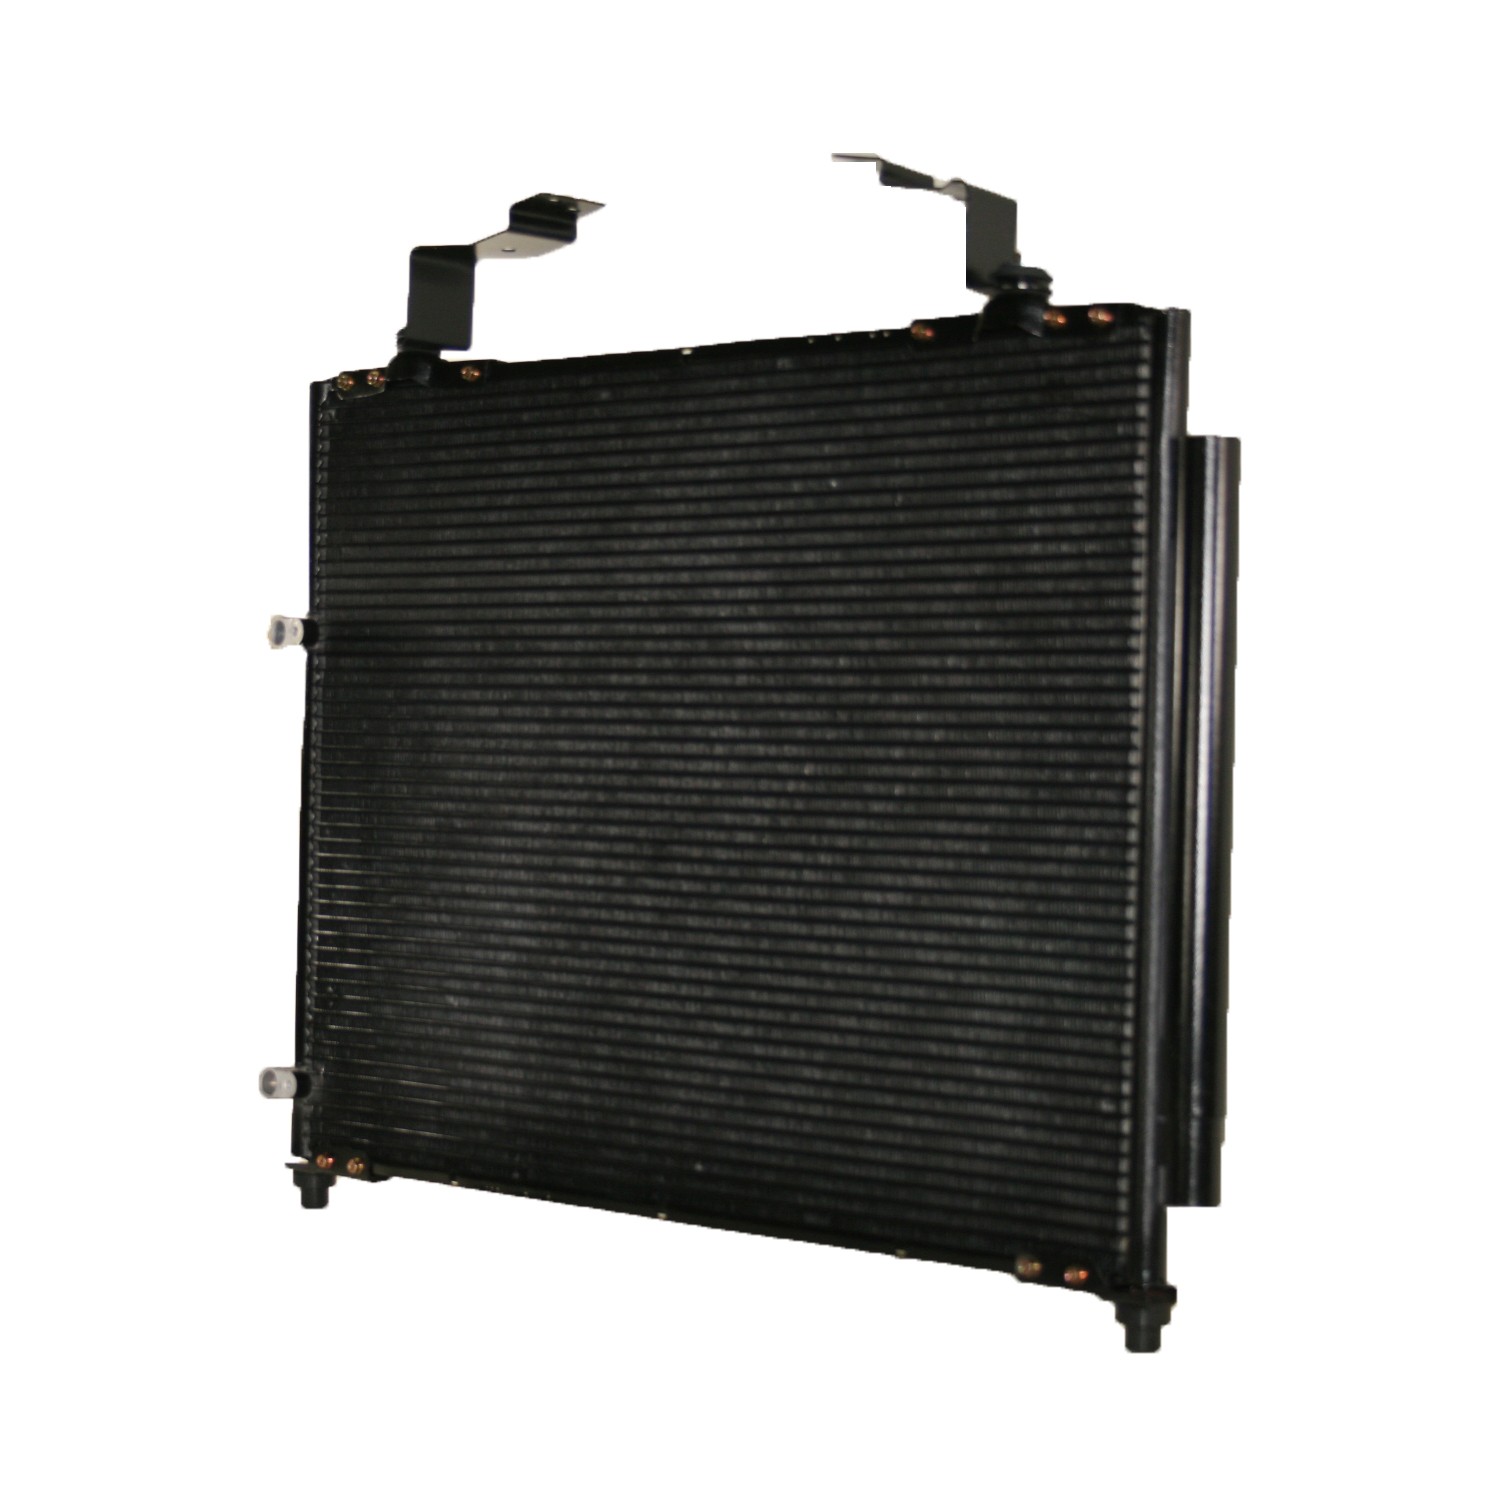 TCW Condenser 44-3290 New Product Image field_60b6a13a6e67c